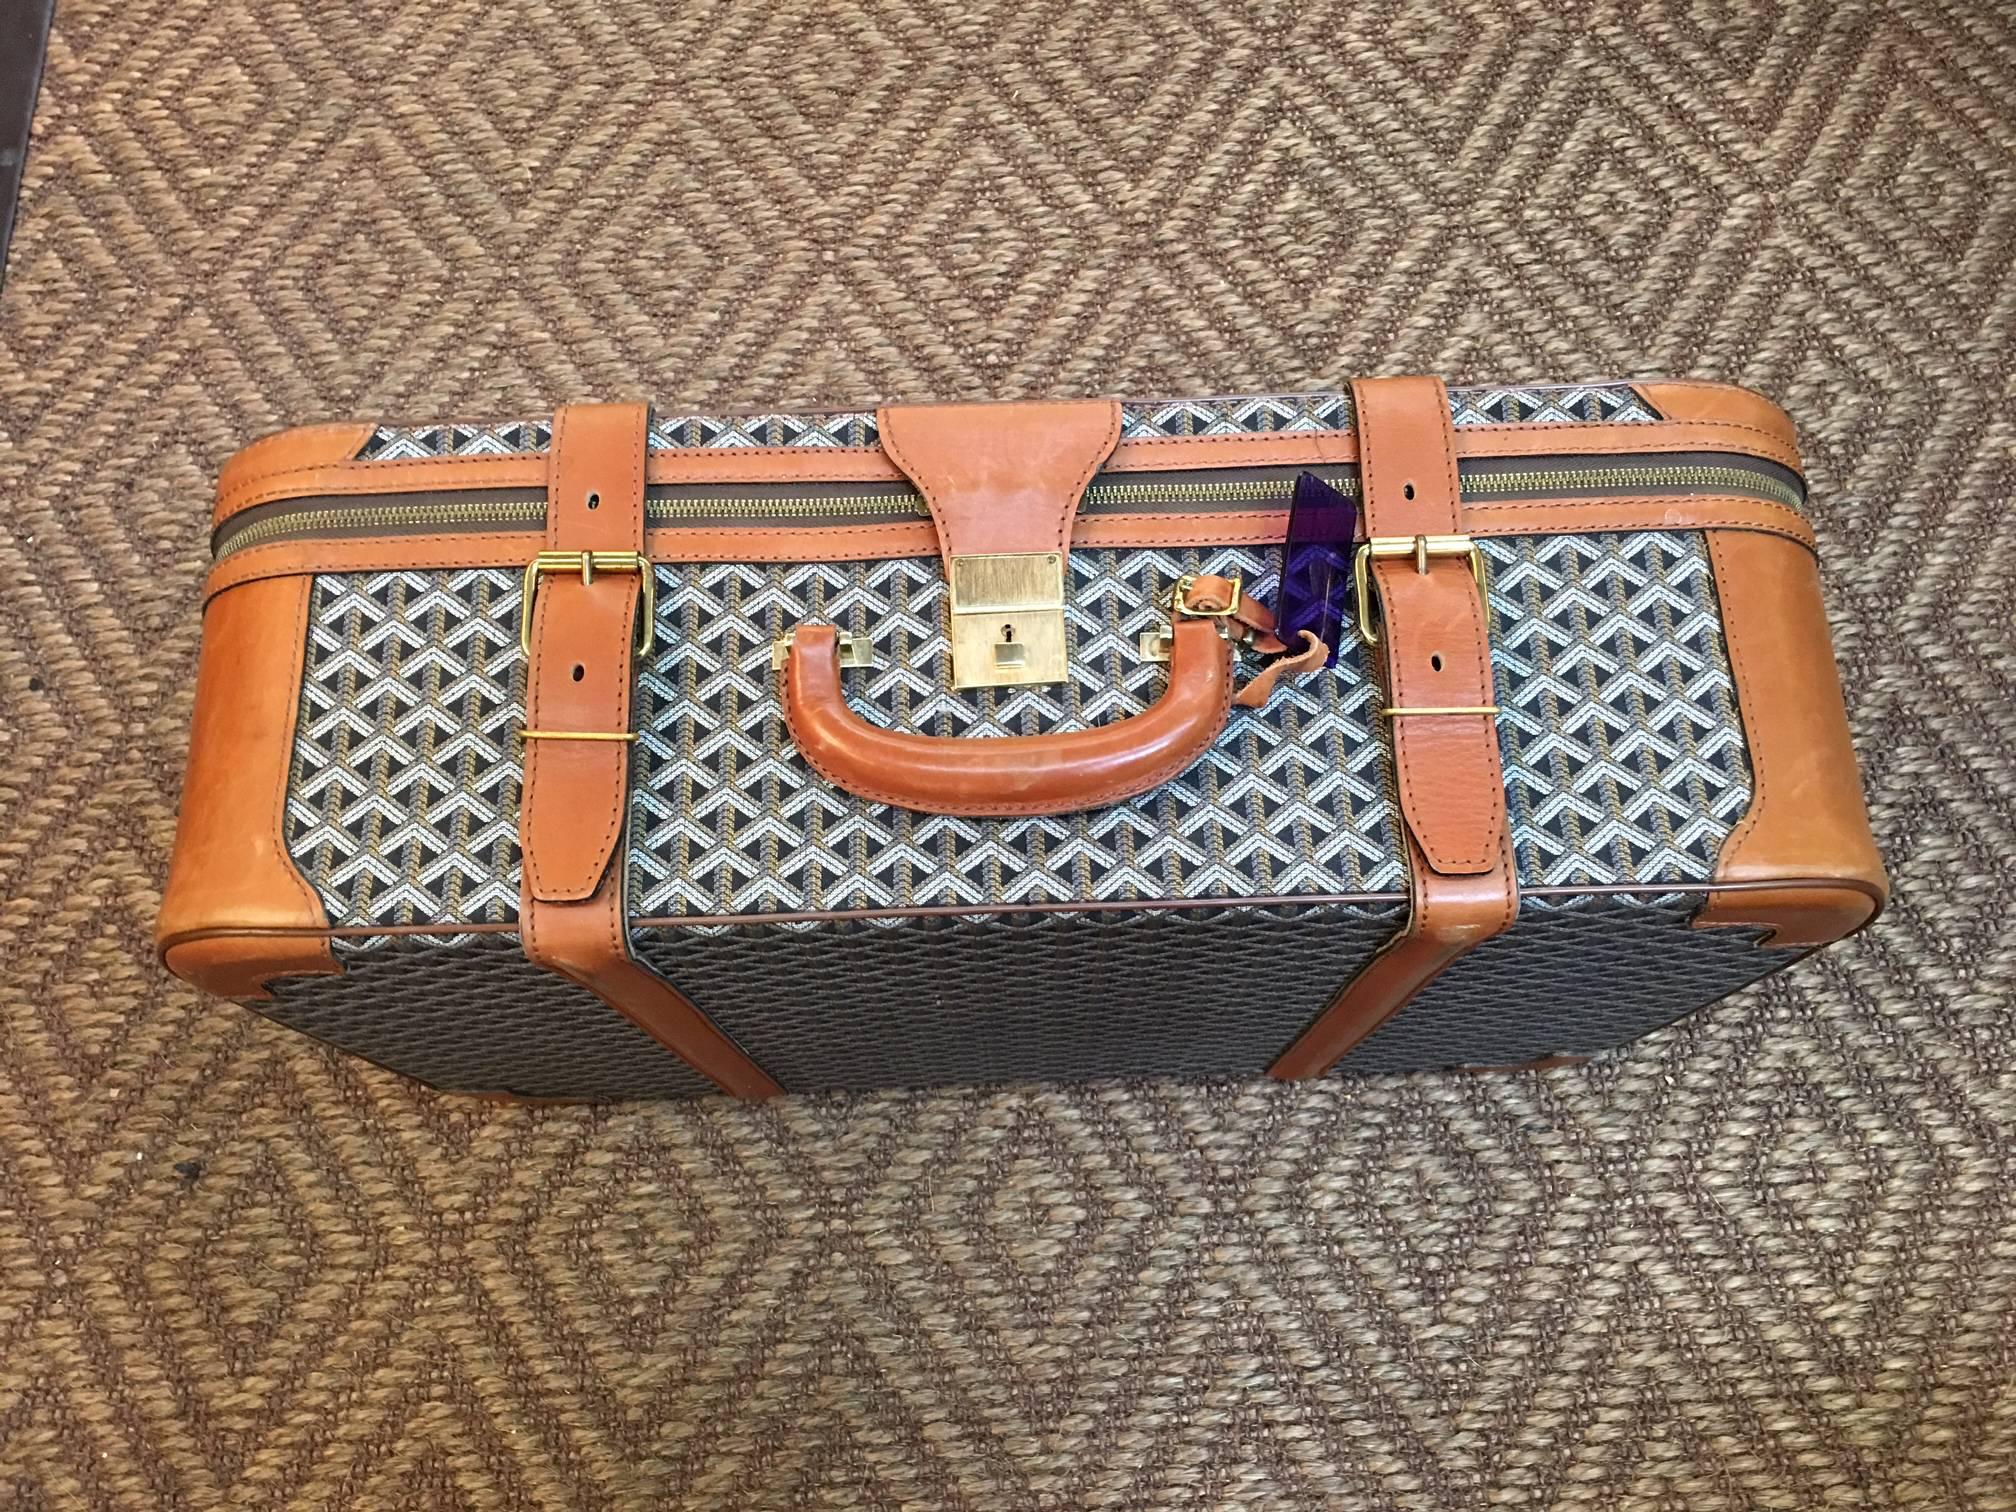 Large vintage Godard suitcase in great condition for its age. Missing its key and original tag but found with the original owners updated luggage tag from Switzerland.